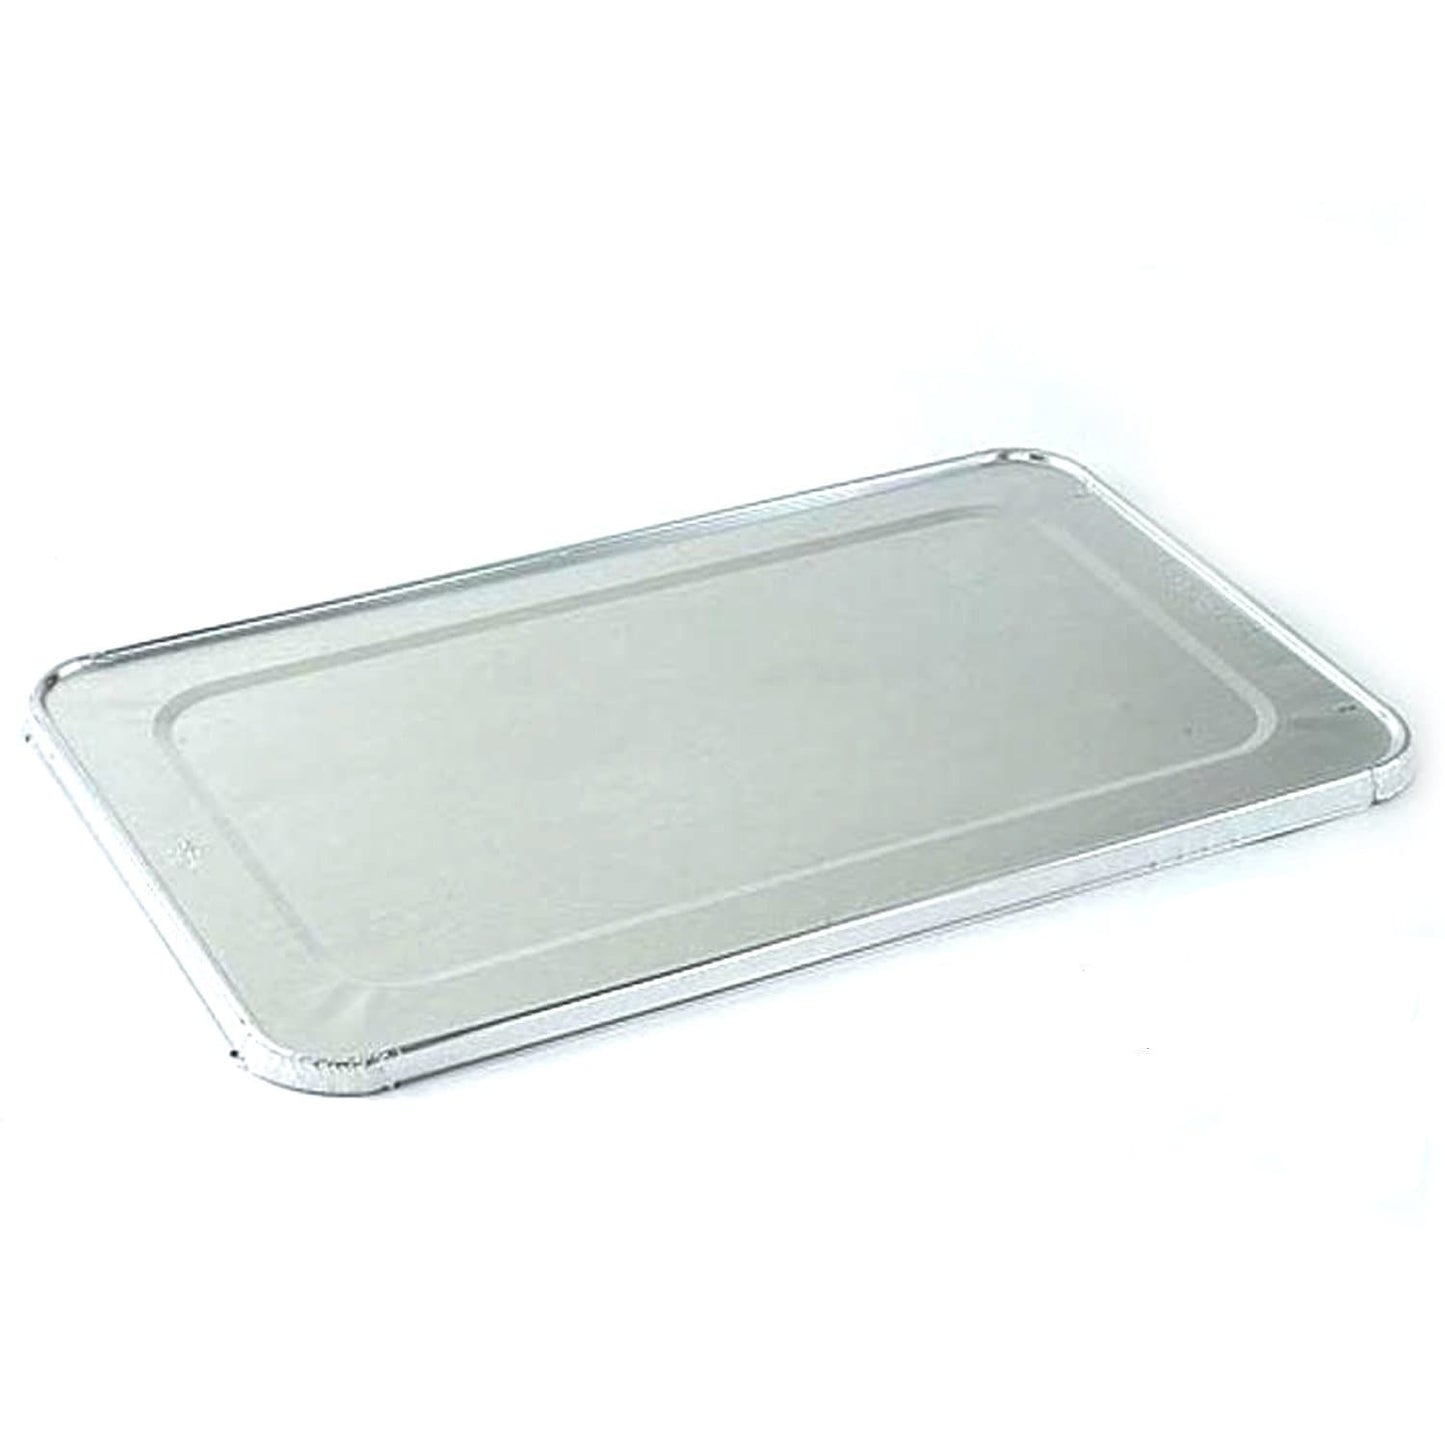 Full Sized Disposable Aluminum Lid for Deep Roster 20.75 X 12.75 X 1.2" Disposable Nicole Collection   